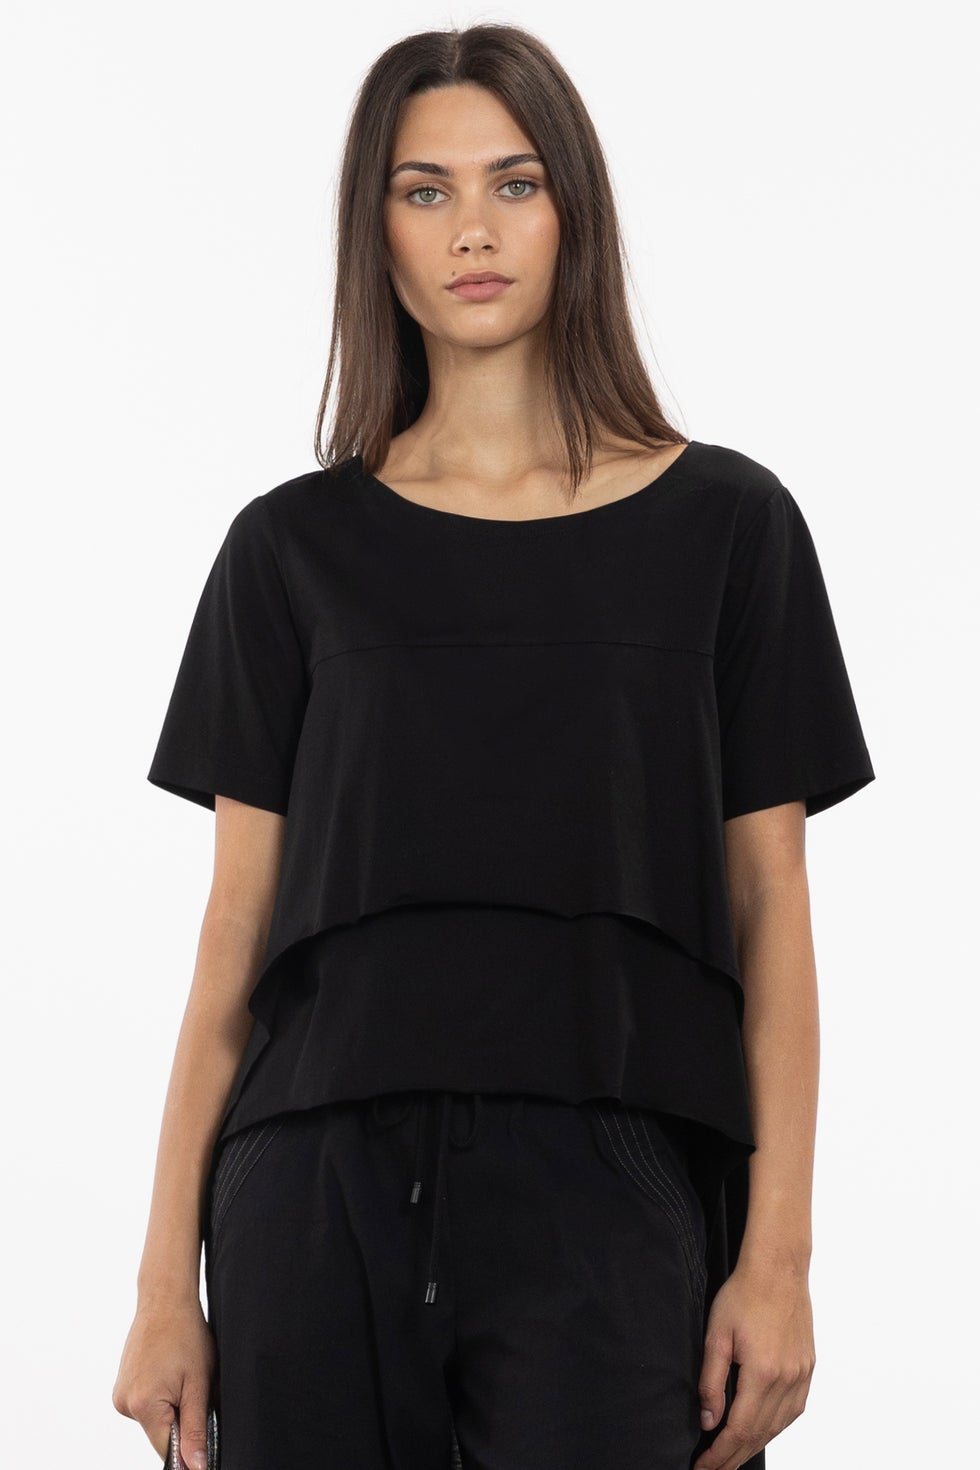 Donna Layered Top in Black | Repertoire